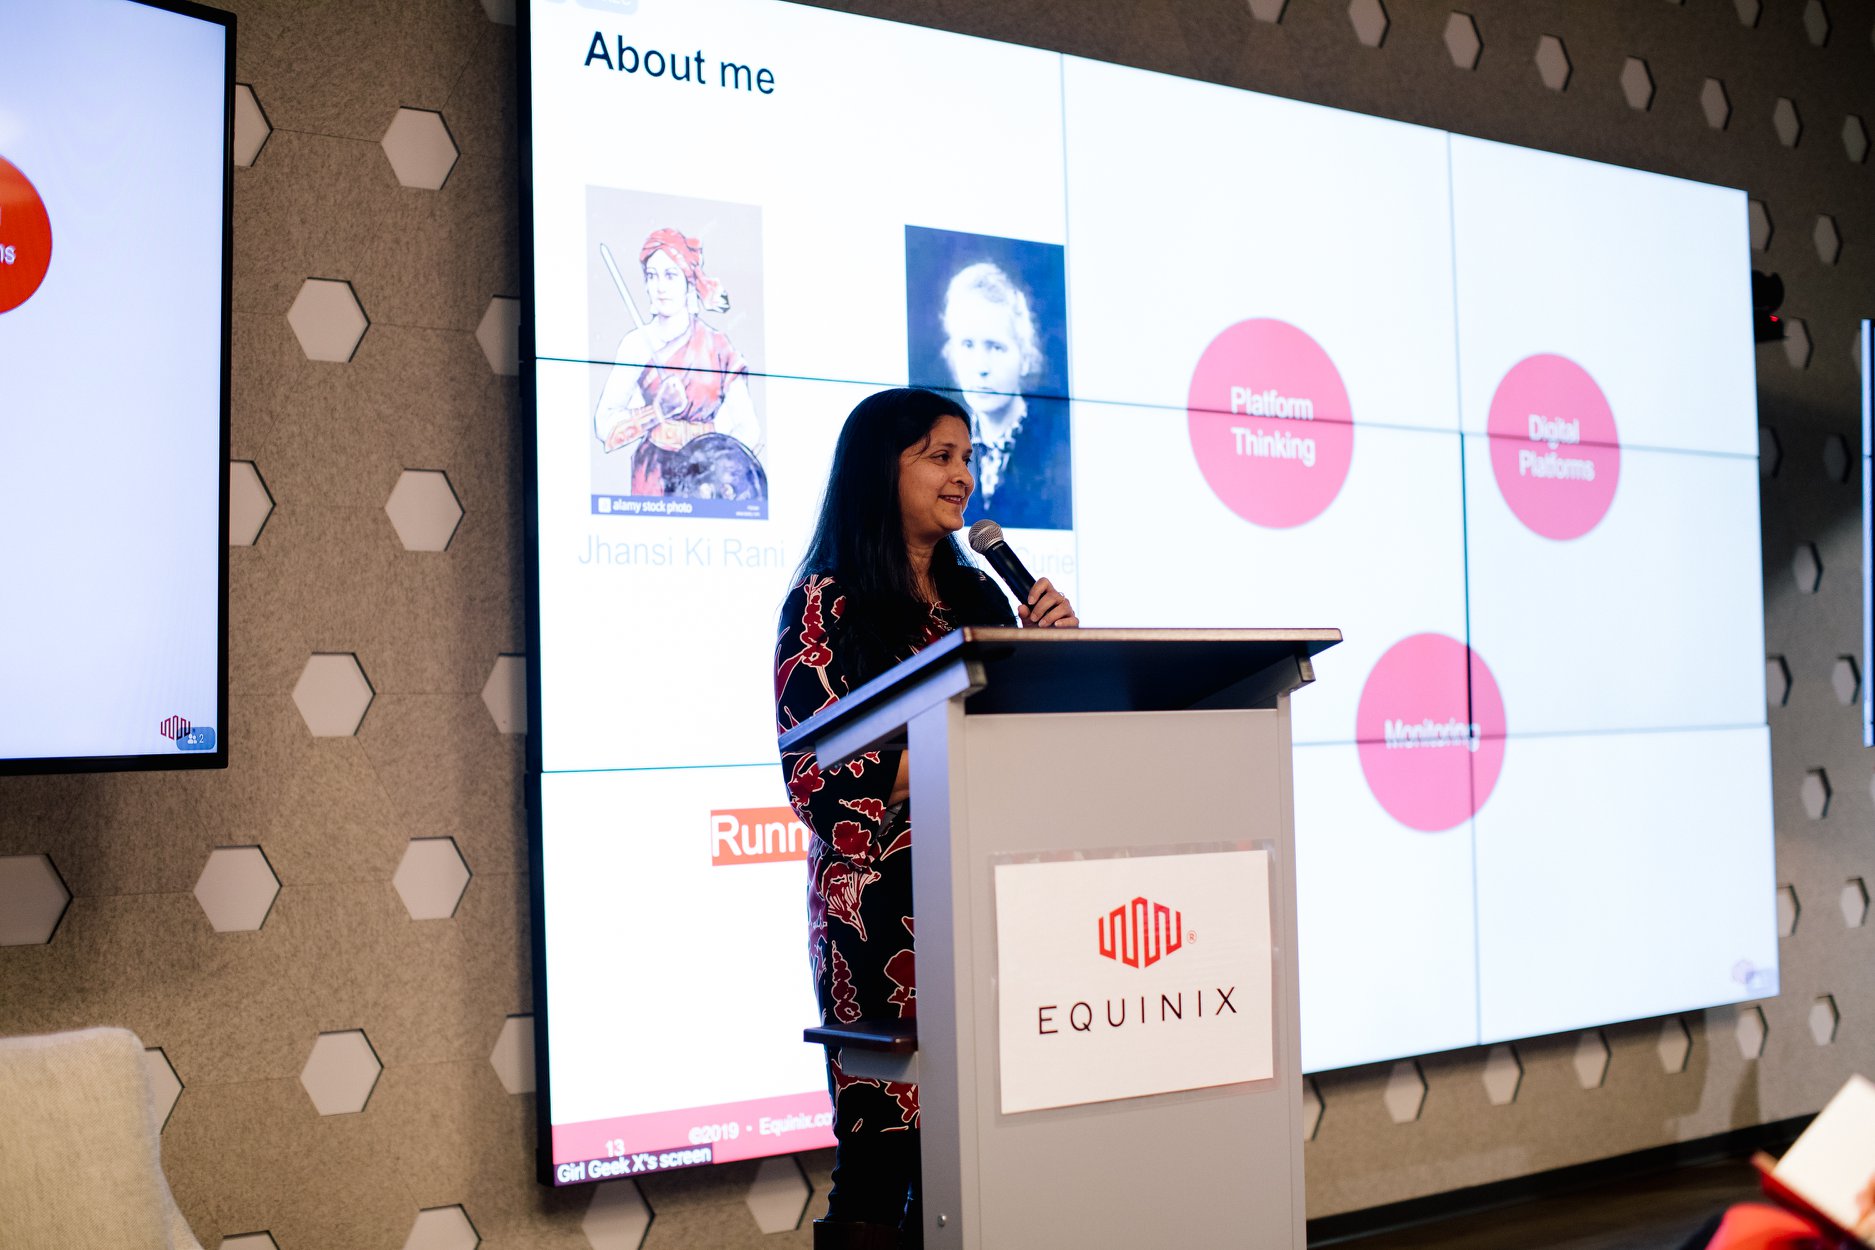 Senior Manager of Product Software Architecture & Engineering Dipti Srivastava gives talk on “leveraging IoT and big data to level the playing field for remote populations” at Equinix Girl Geek Dinner 2019.